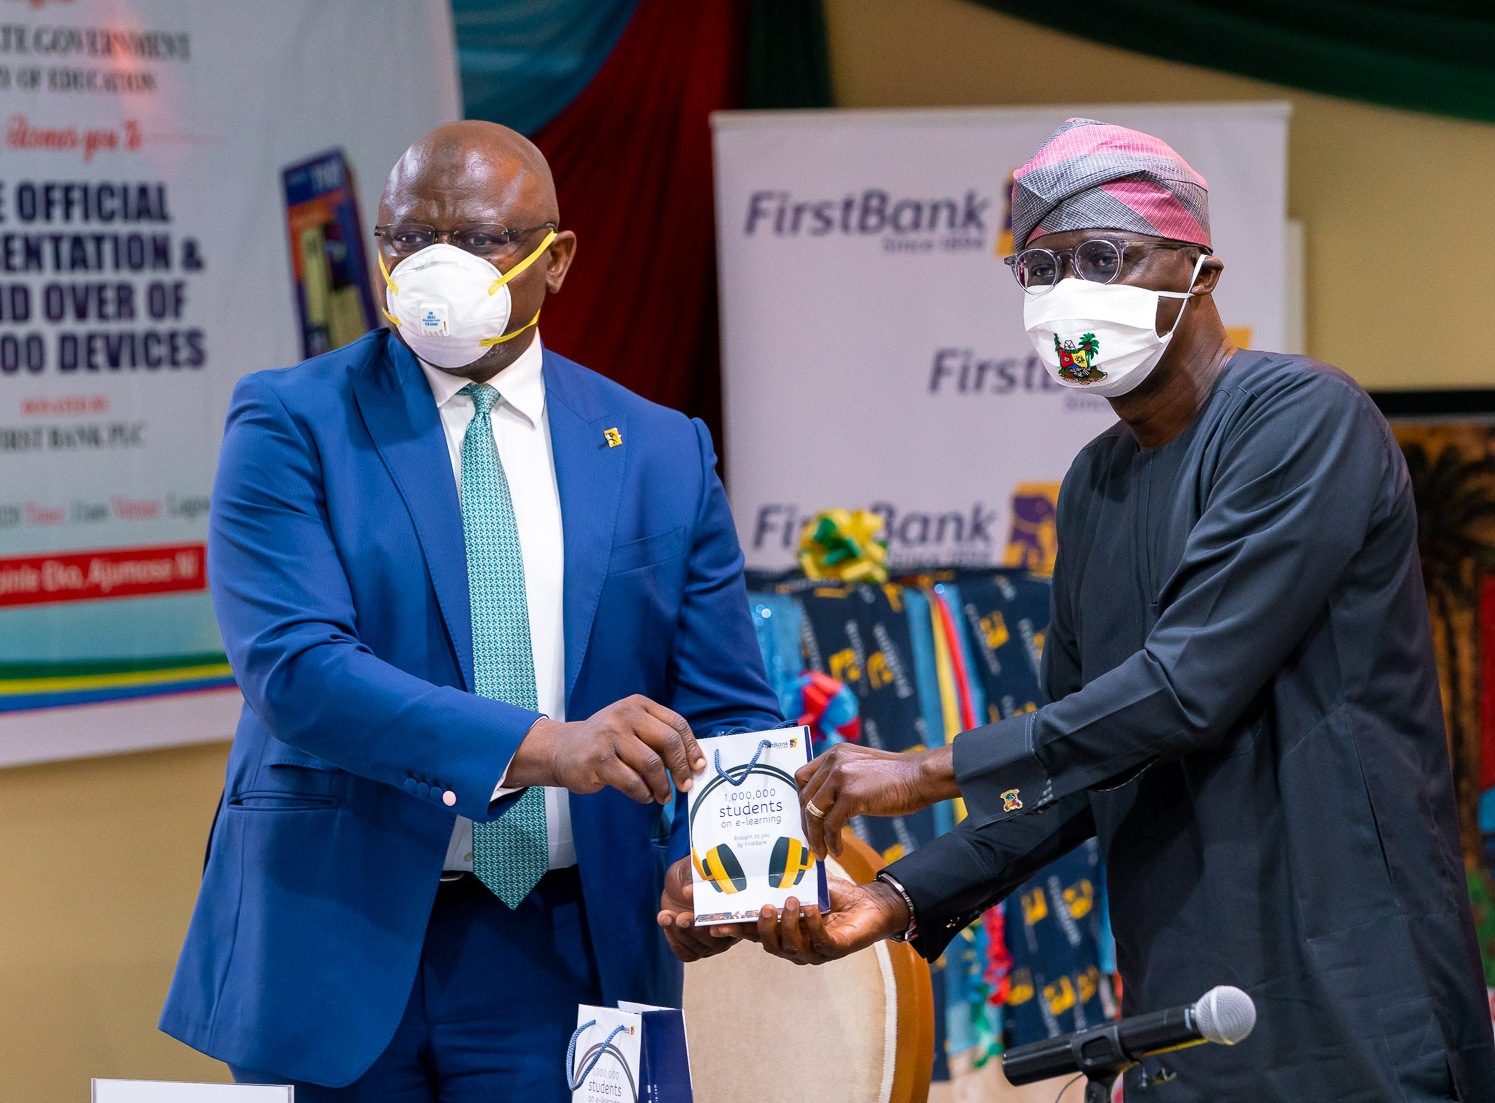 First Bank Donates 20,000 e-Learning Digital Devices To Lagos Public Schols